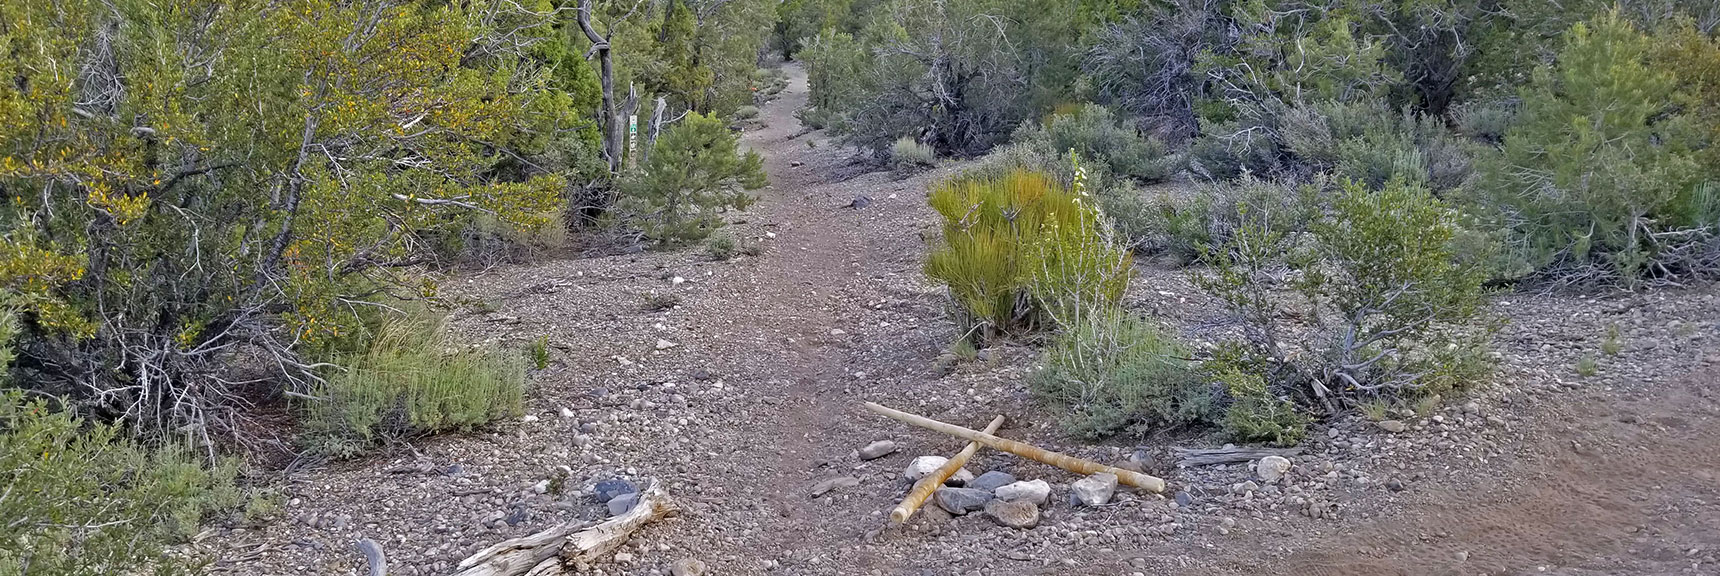 Second Turnoff from Main Trail for Both Mud Springs Loop (green) and Pinyon Pine Loop (red). Only Shows Green. | Pinyon Pine Loop Trail | Sawmill Trailhead | Lee Canyon | Mt Charleston Wilderness | Spring Mountains, Nevada